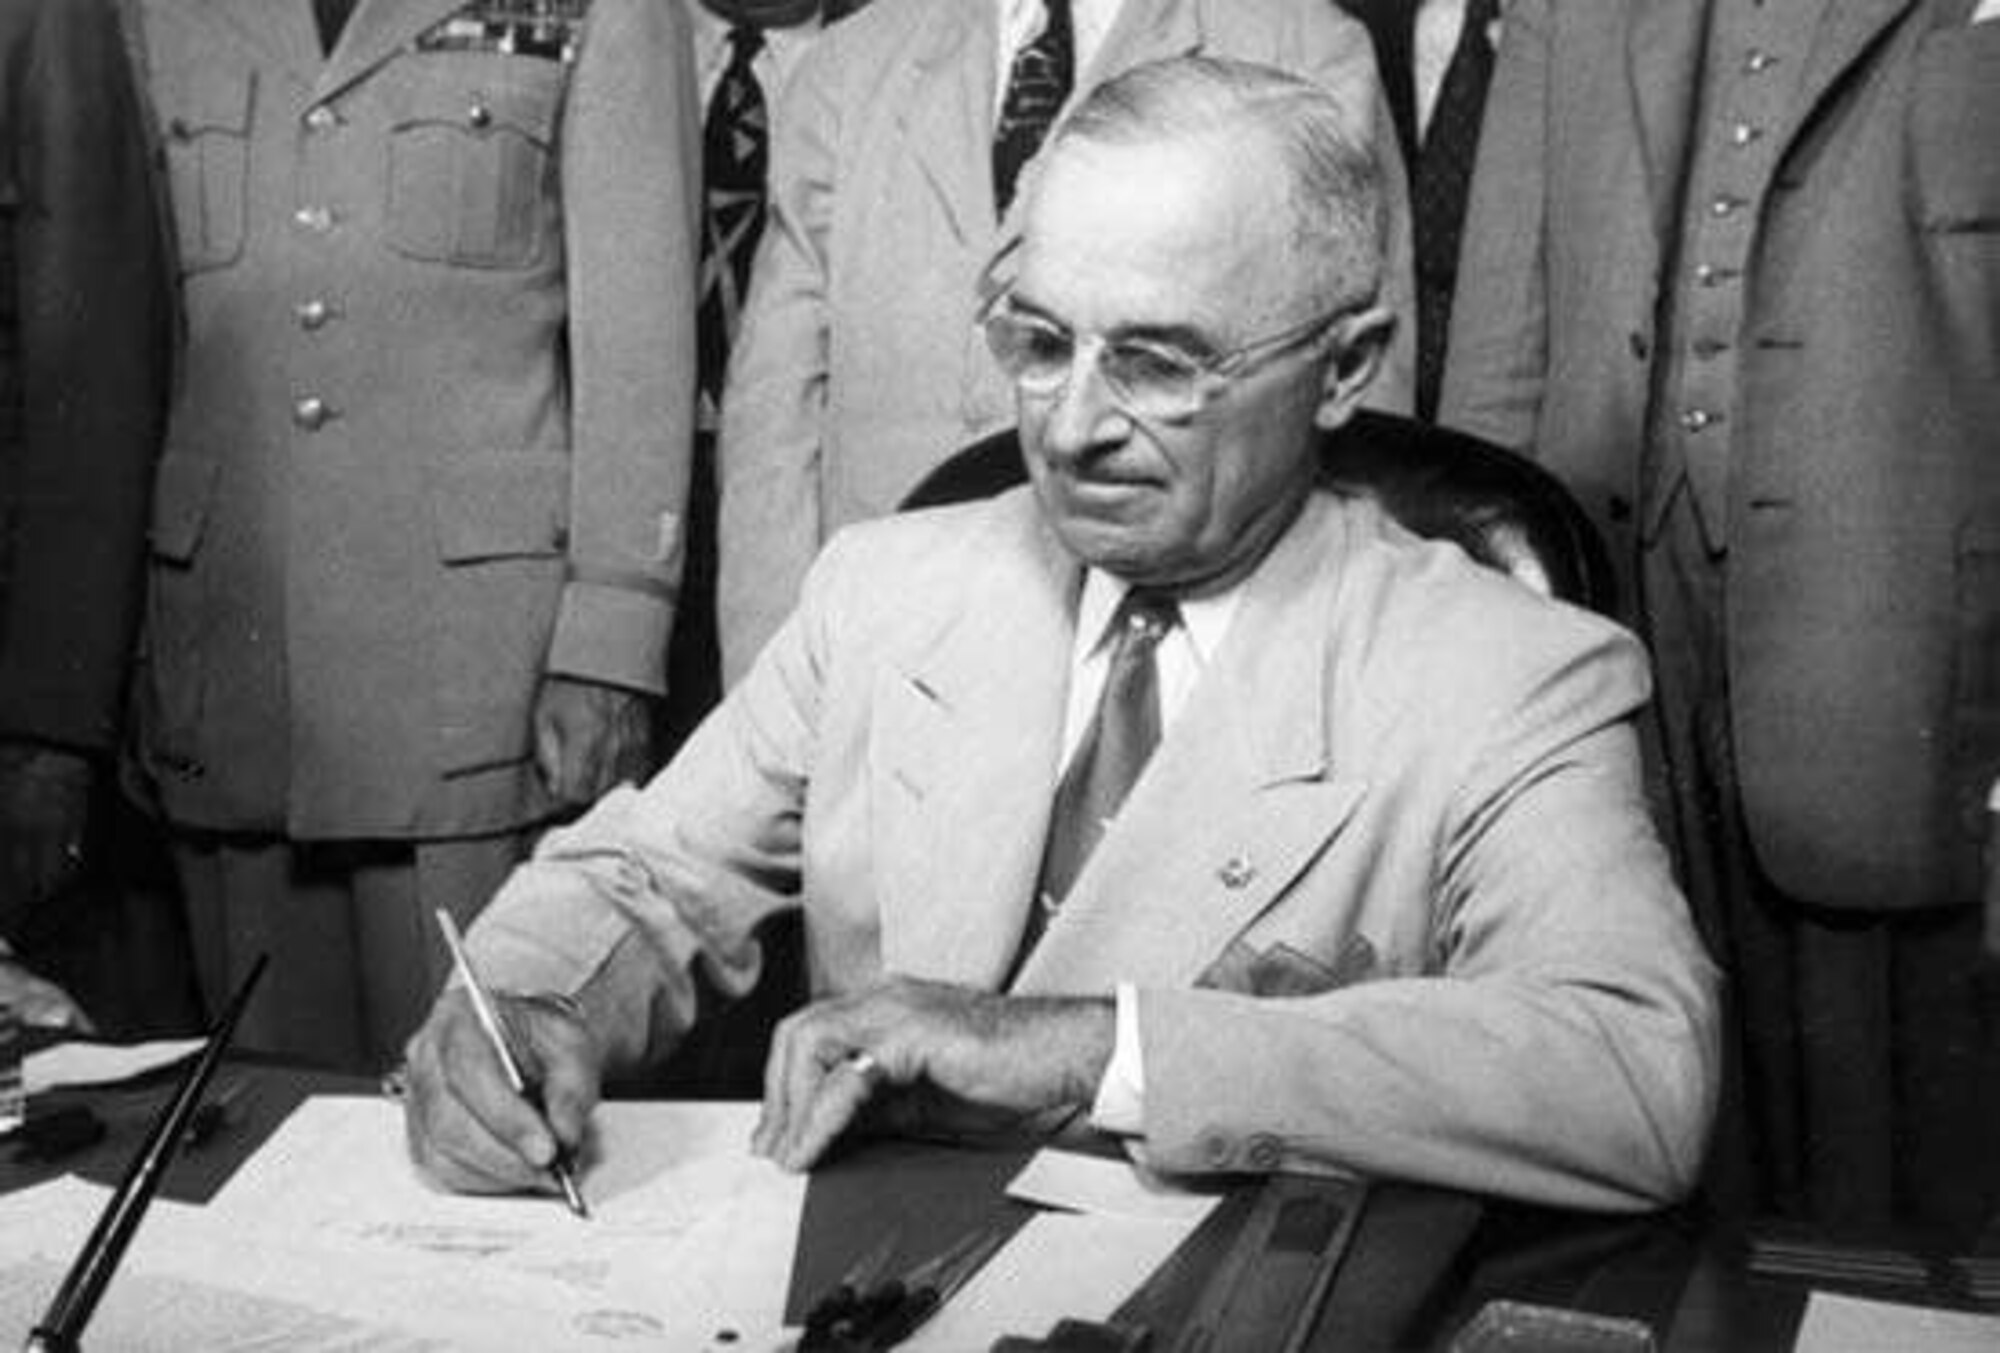 President Harry S. Truman signs the National Security Act into law in the Oval office, Washington D.C., July 26, 1947.